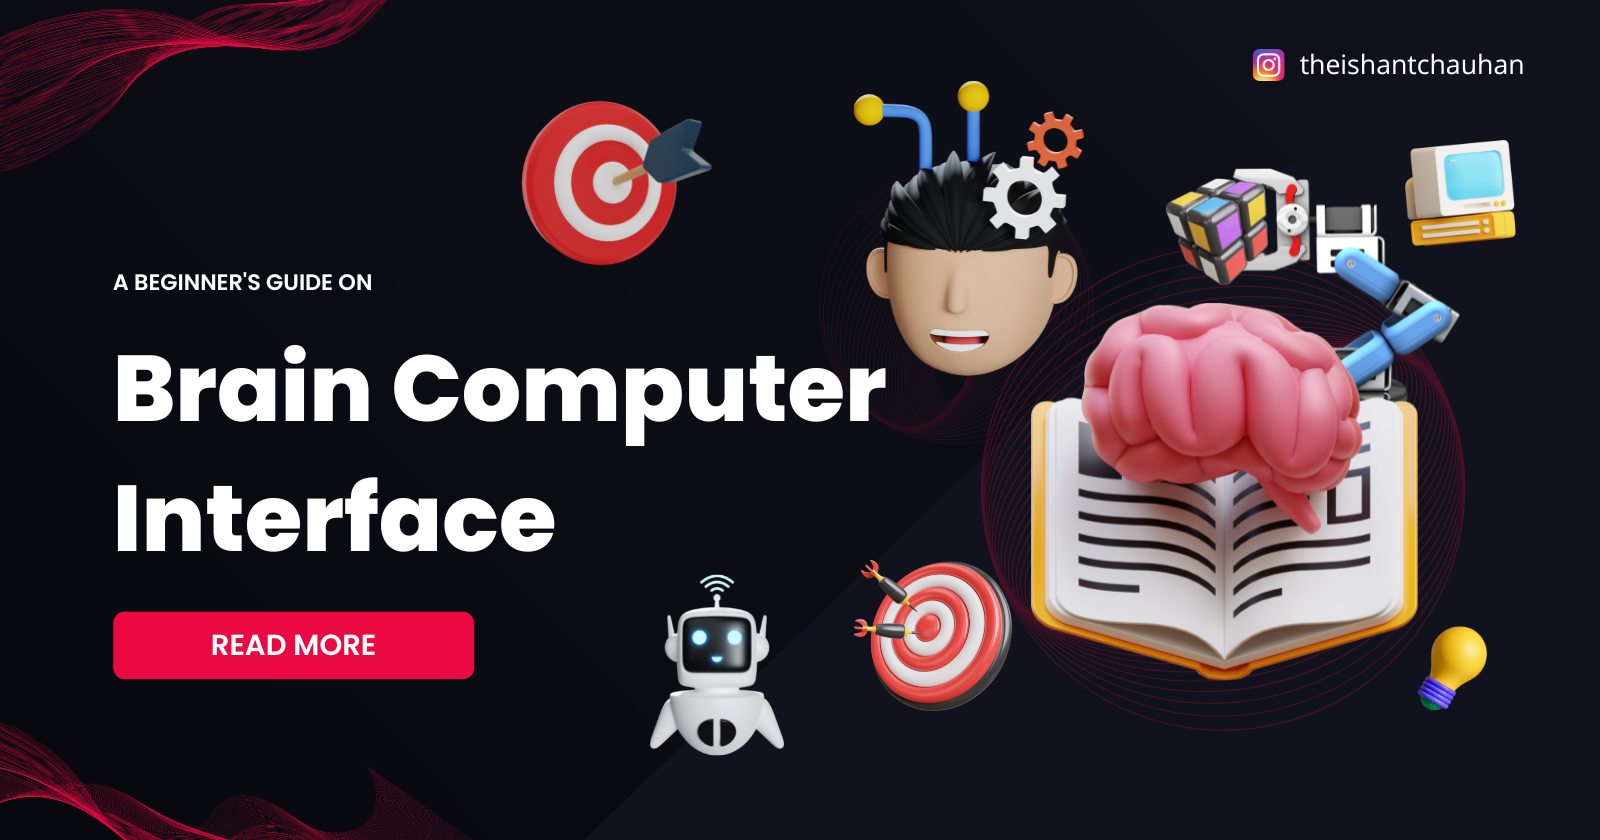 Brain Computer Interface: How To Get Started, Applications, Challenges And More